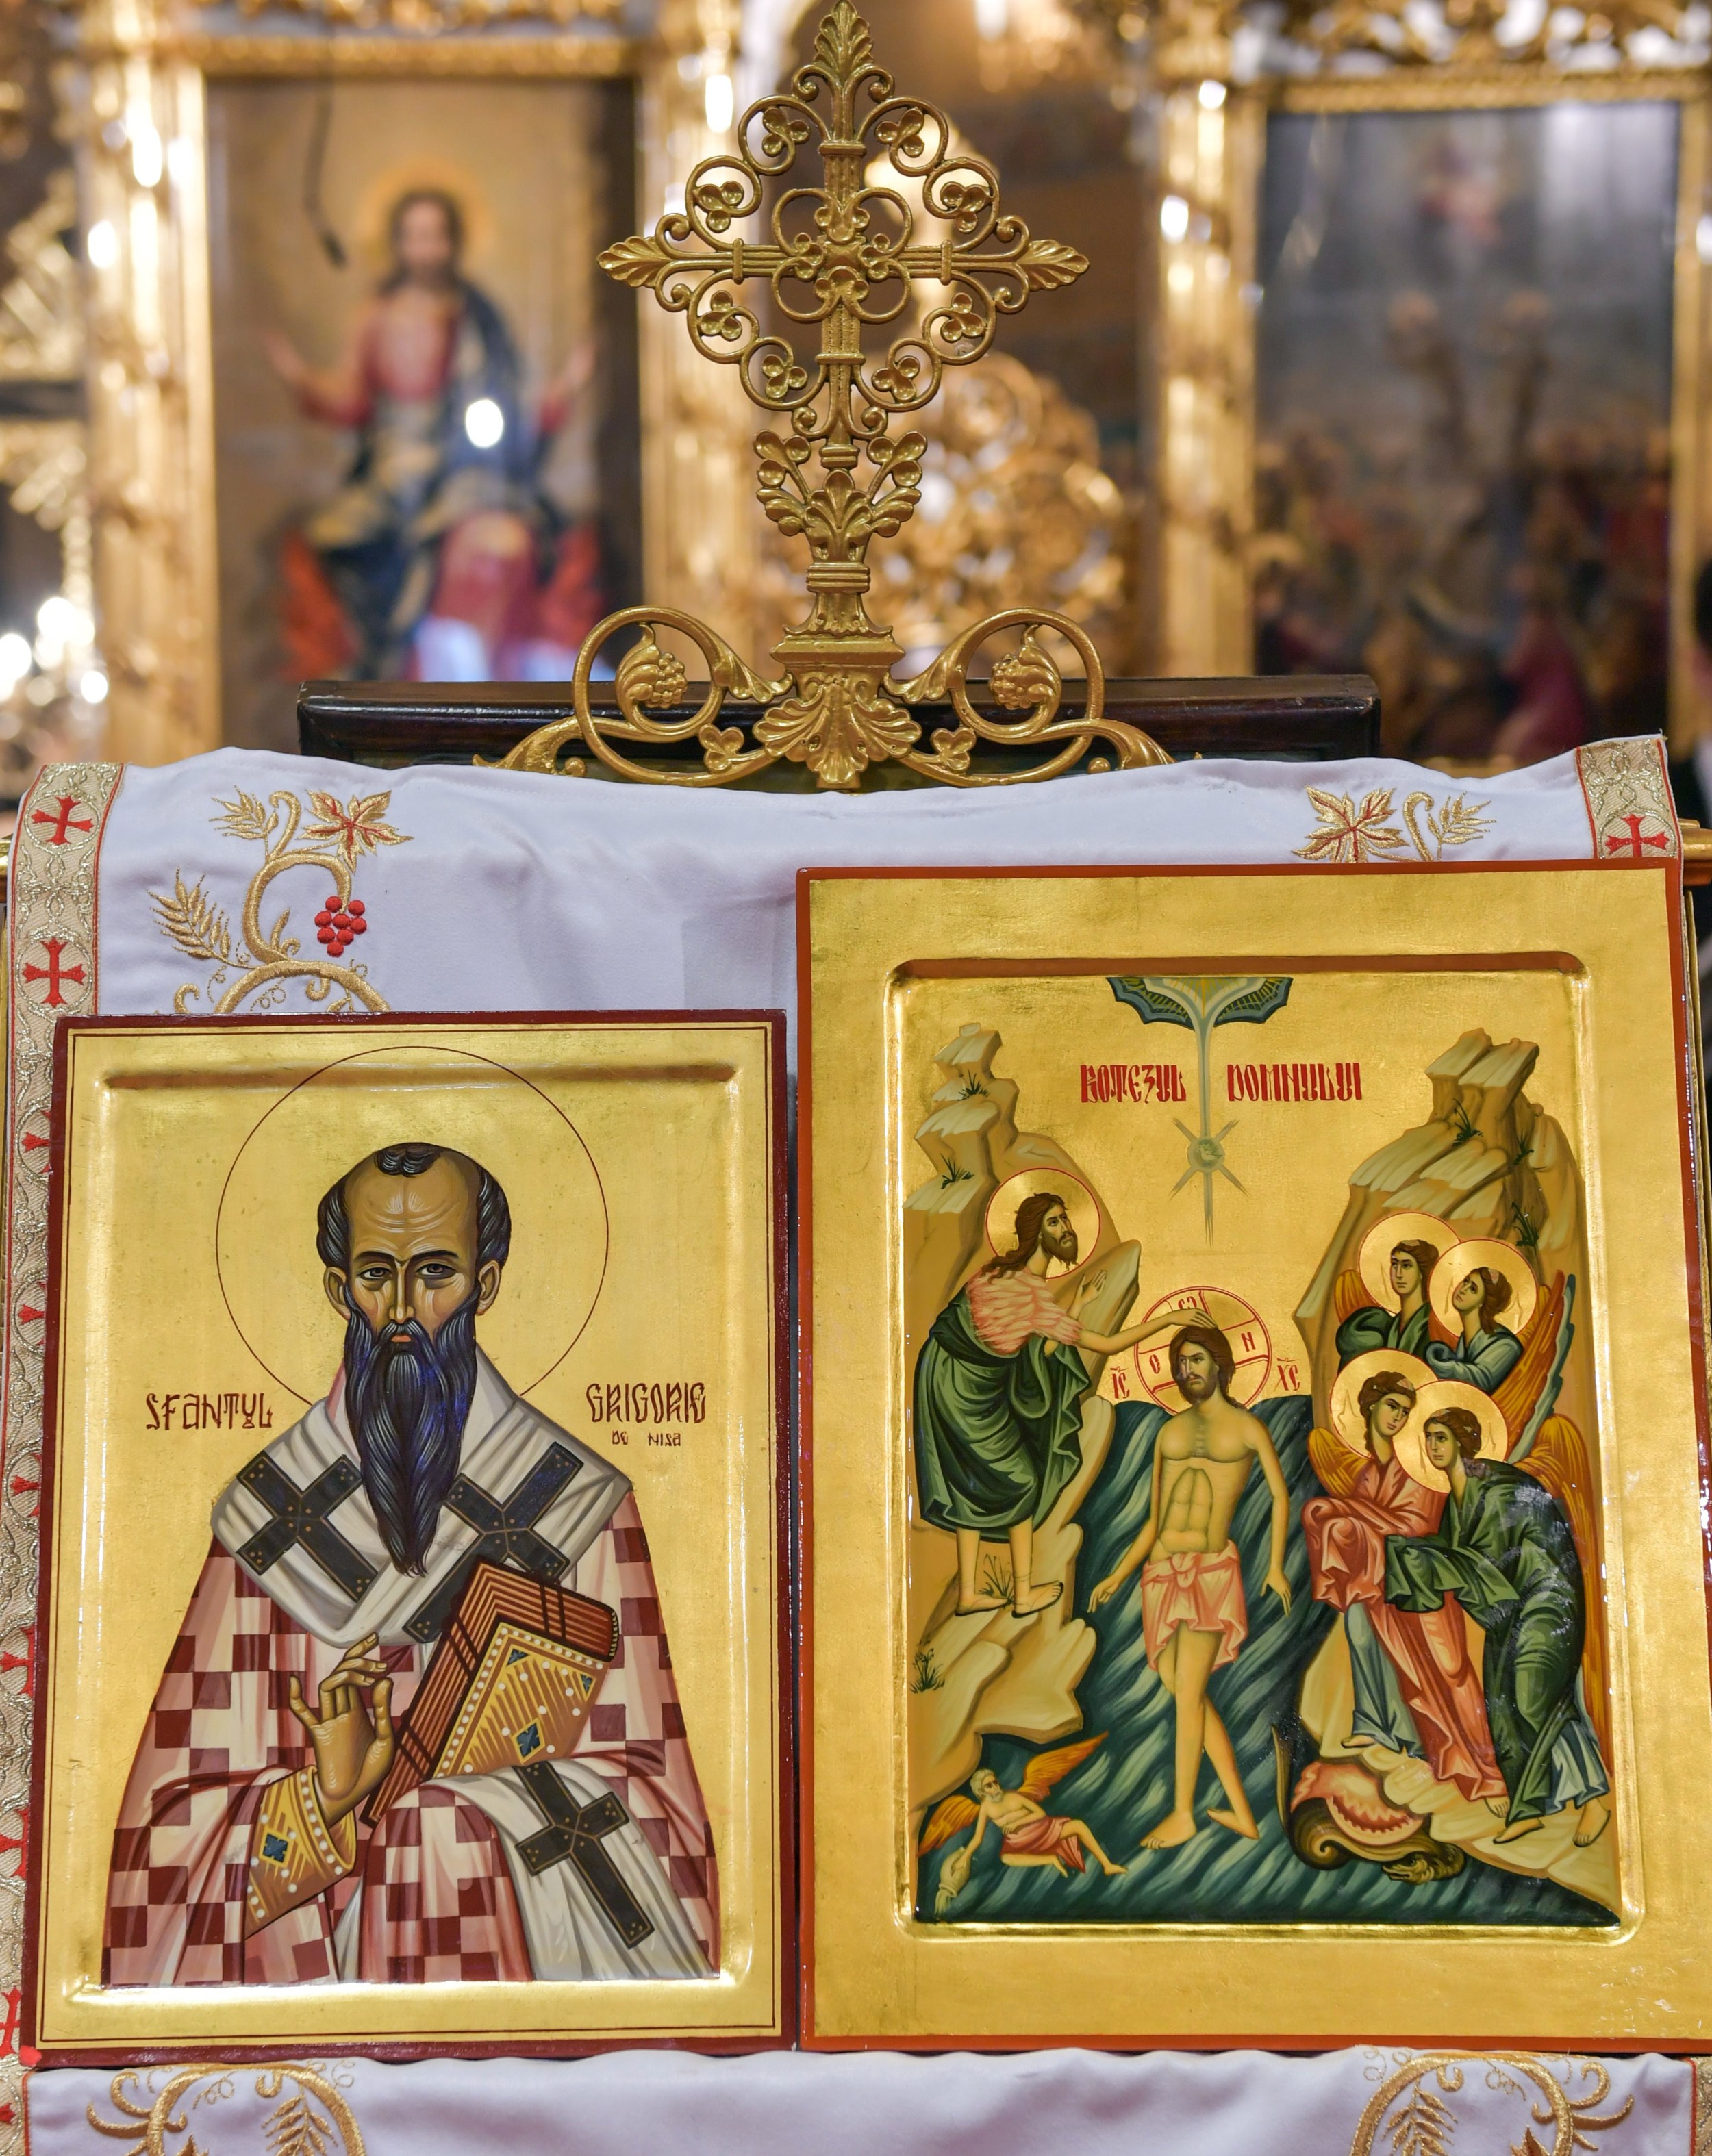 St Gregory of Nyssa celebrated in Bucharest – Believers venerated the relics of the Saint